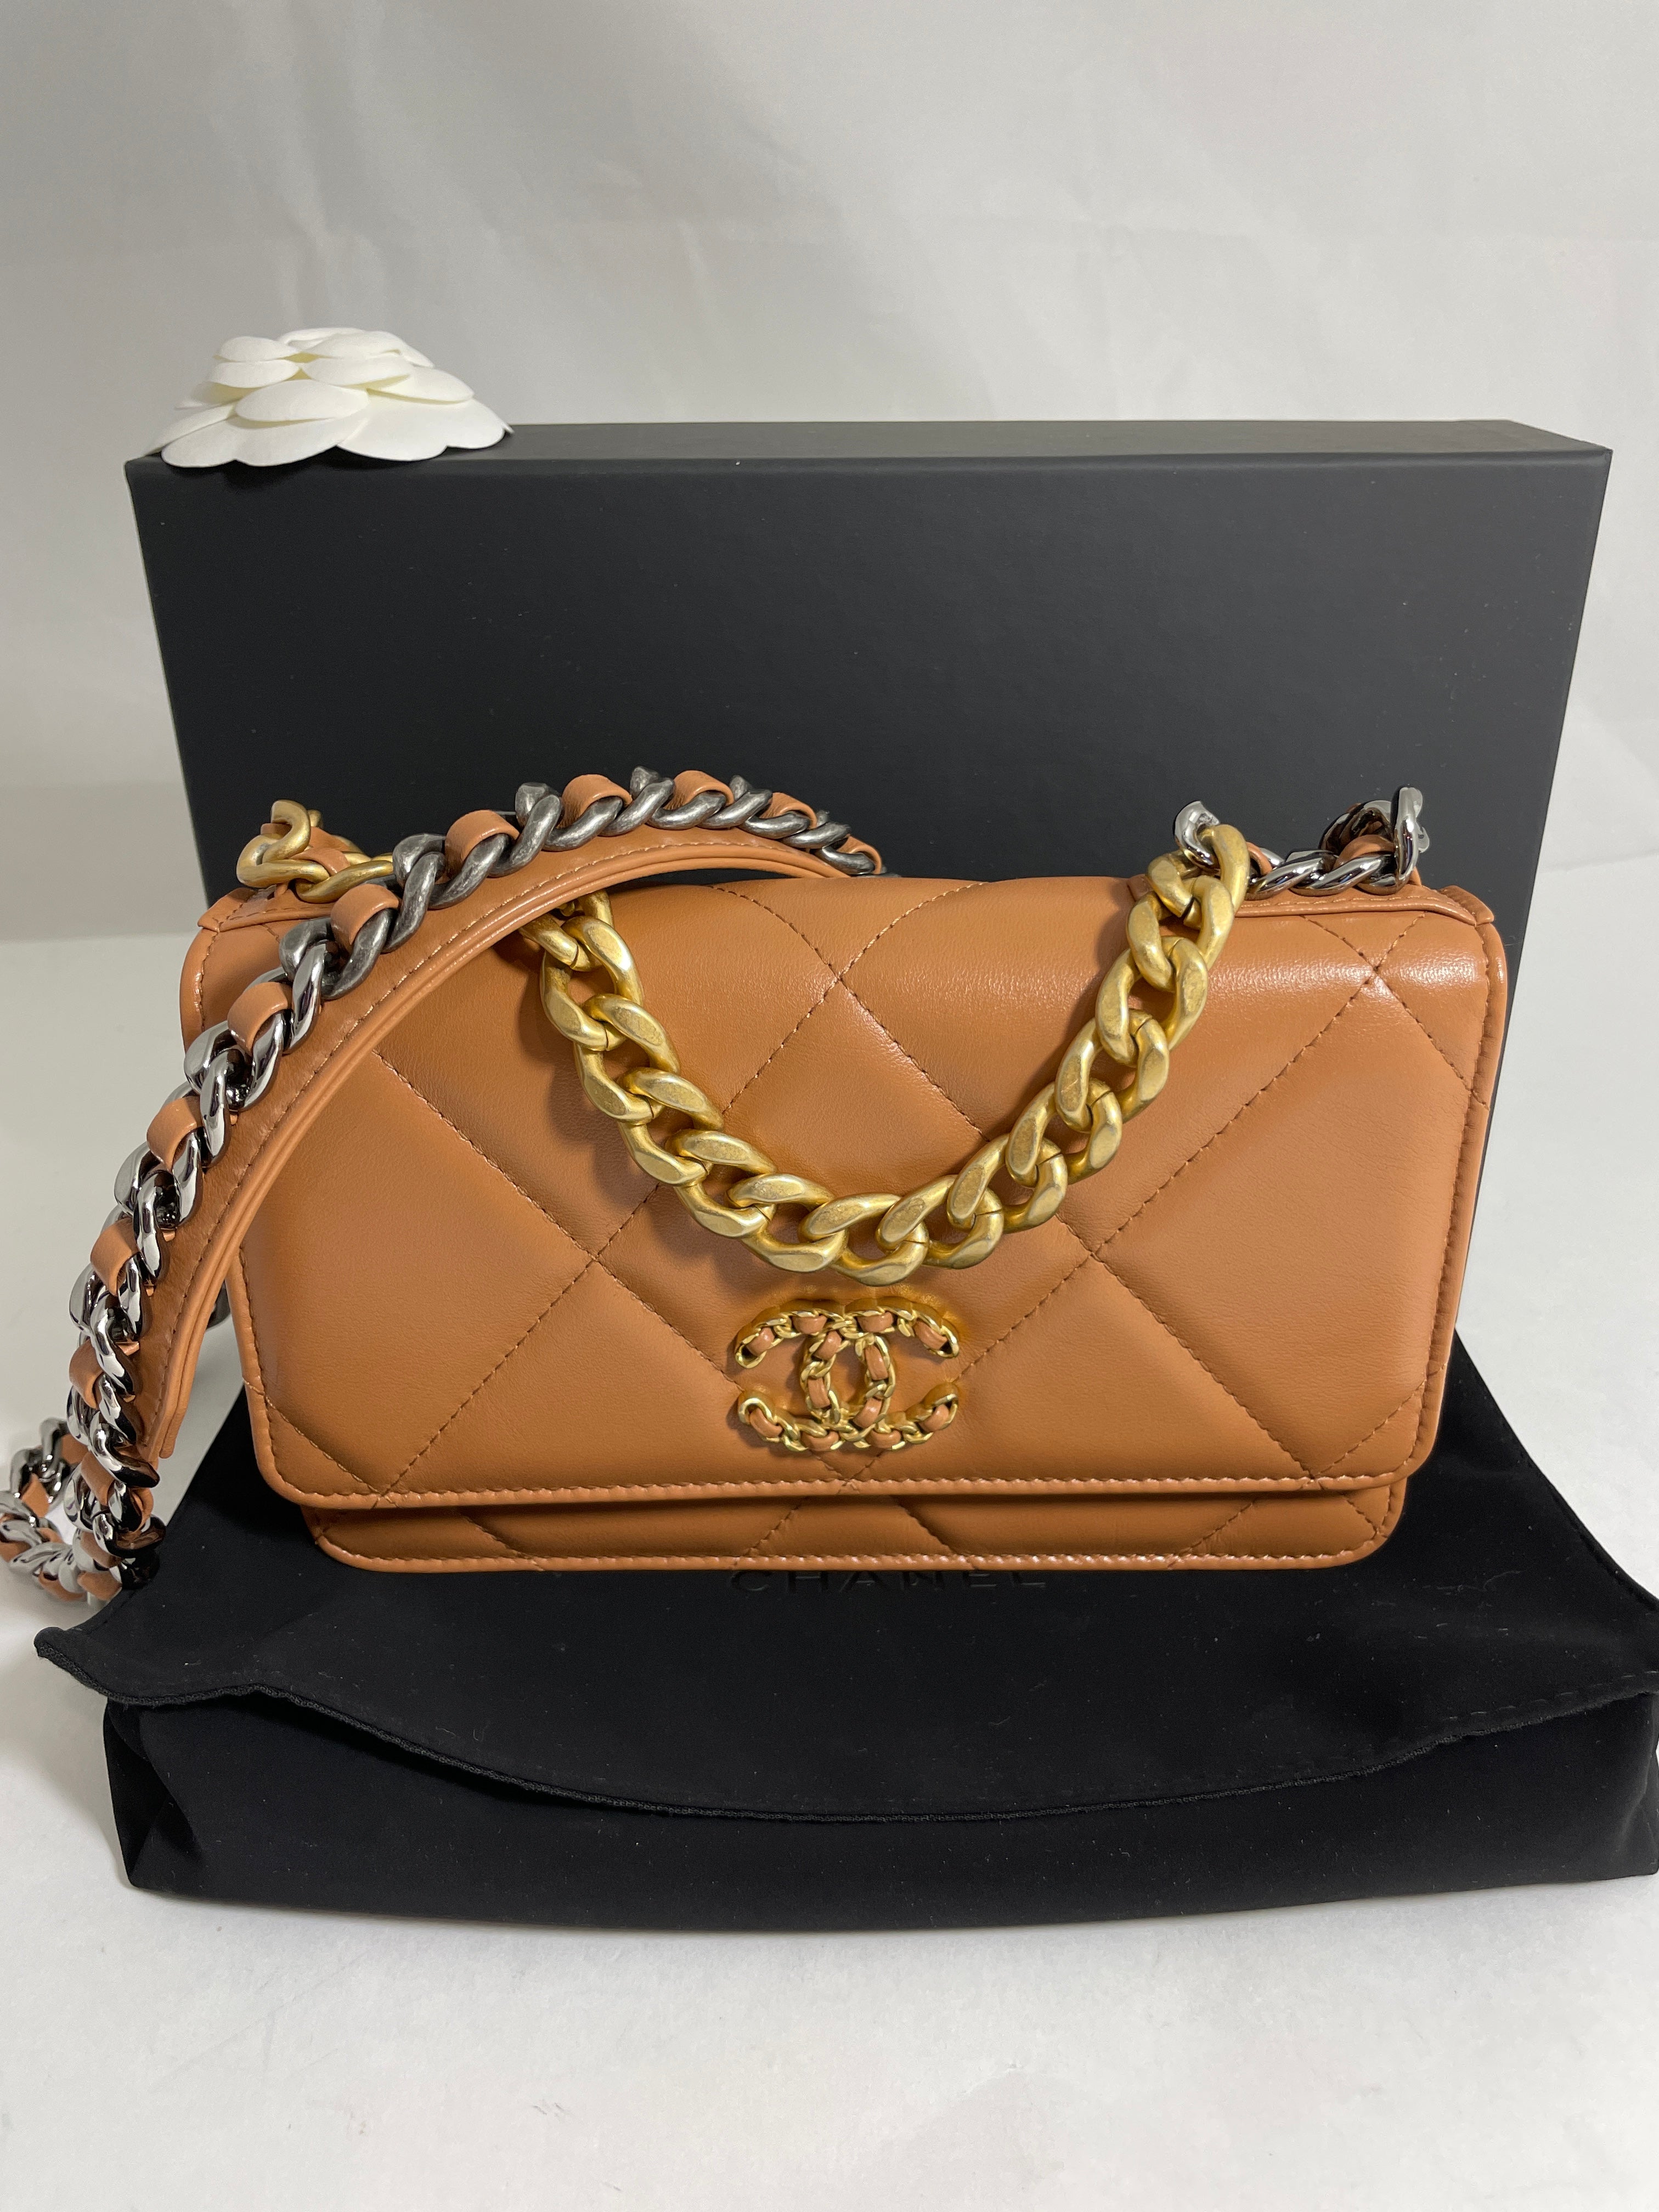 CHANEL, Bags, Auth Crossbody Or Arm Chanel Purse Petite Maroquinerie From  Paris W Gold Chain